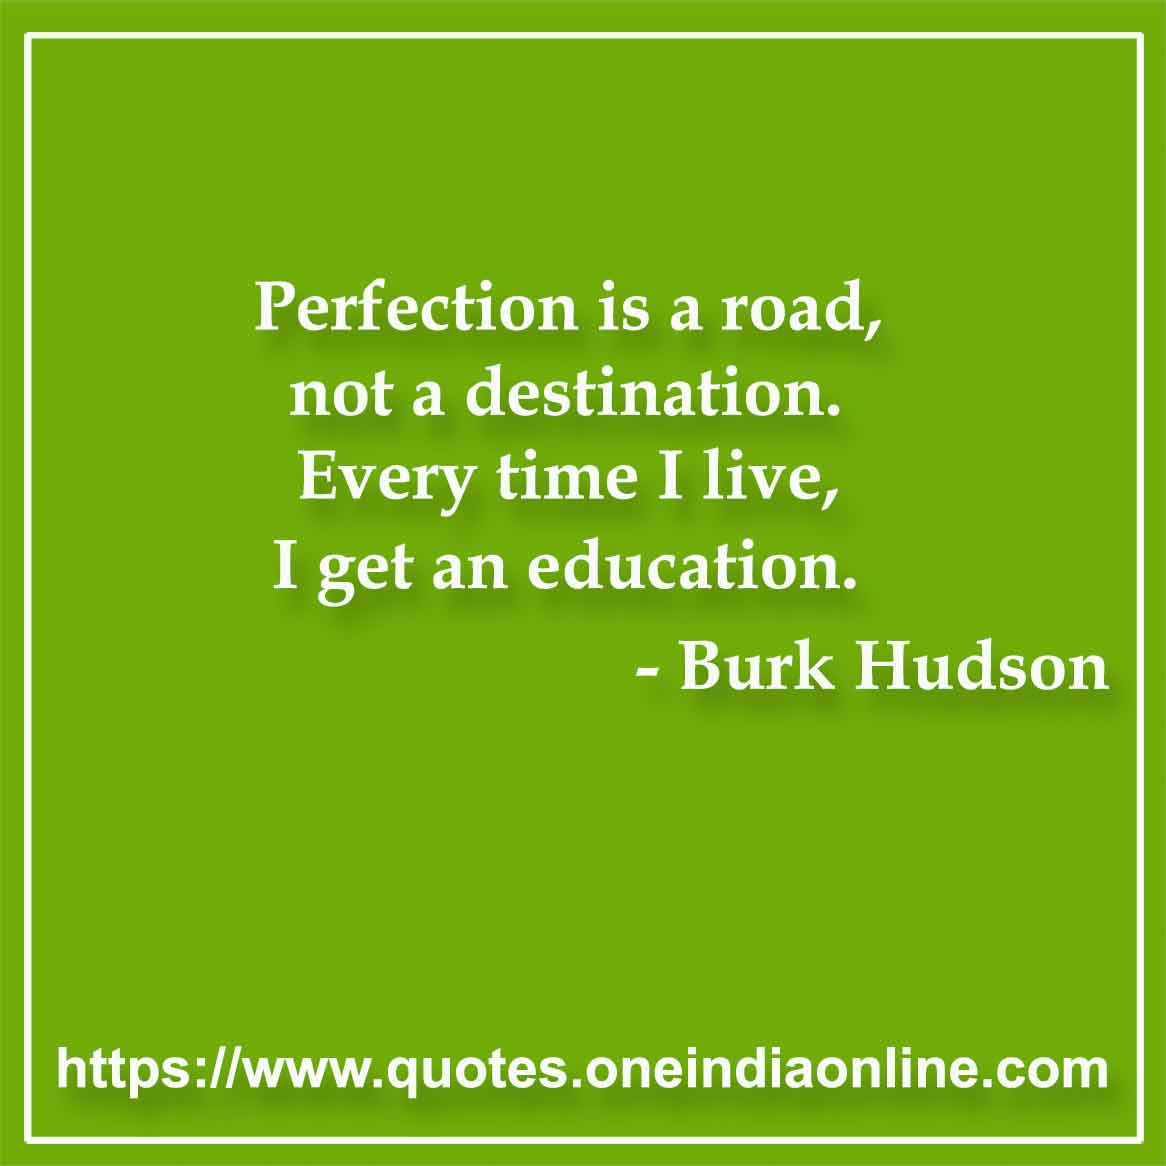 Perfection is a road, not a destination. Every time I live, I get an education. 

- Perfection Quotes by Burk Hudson 